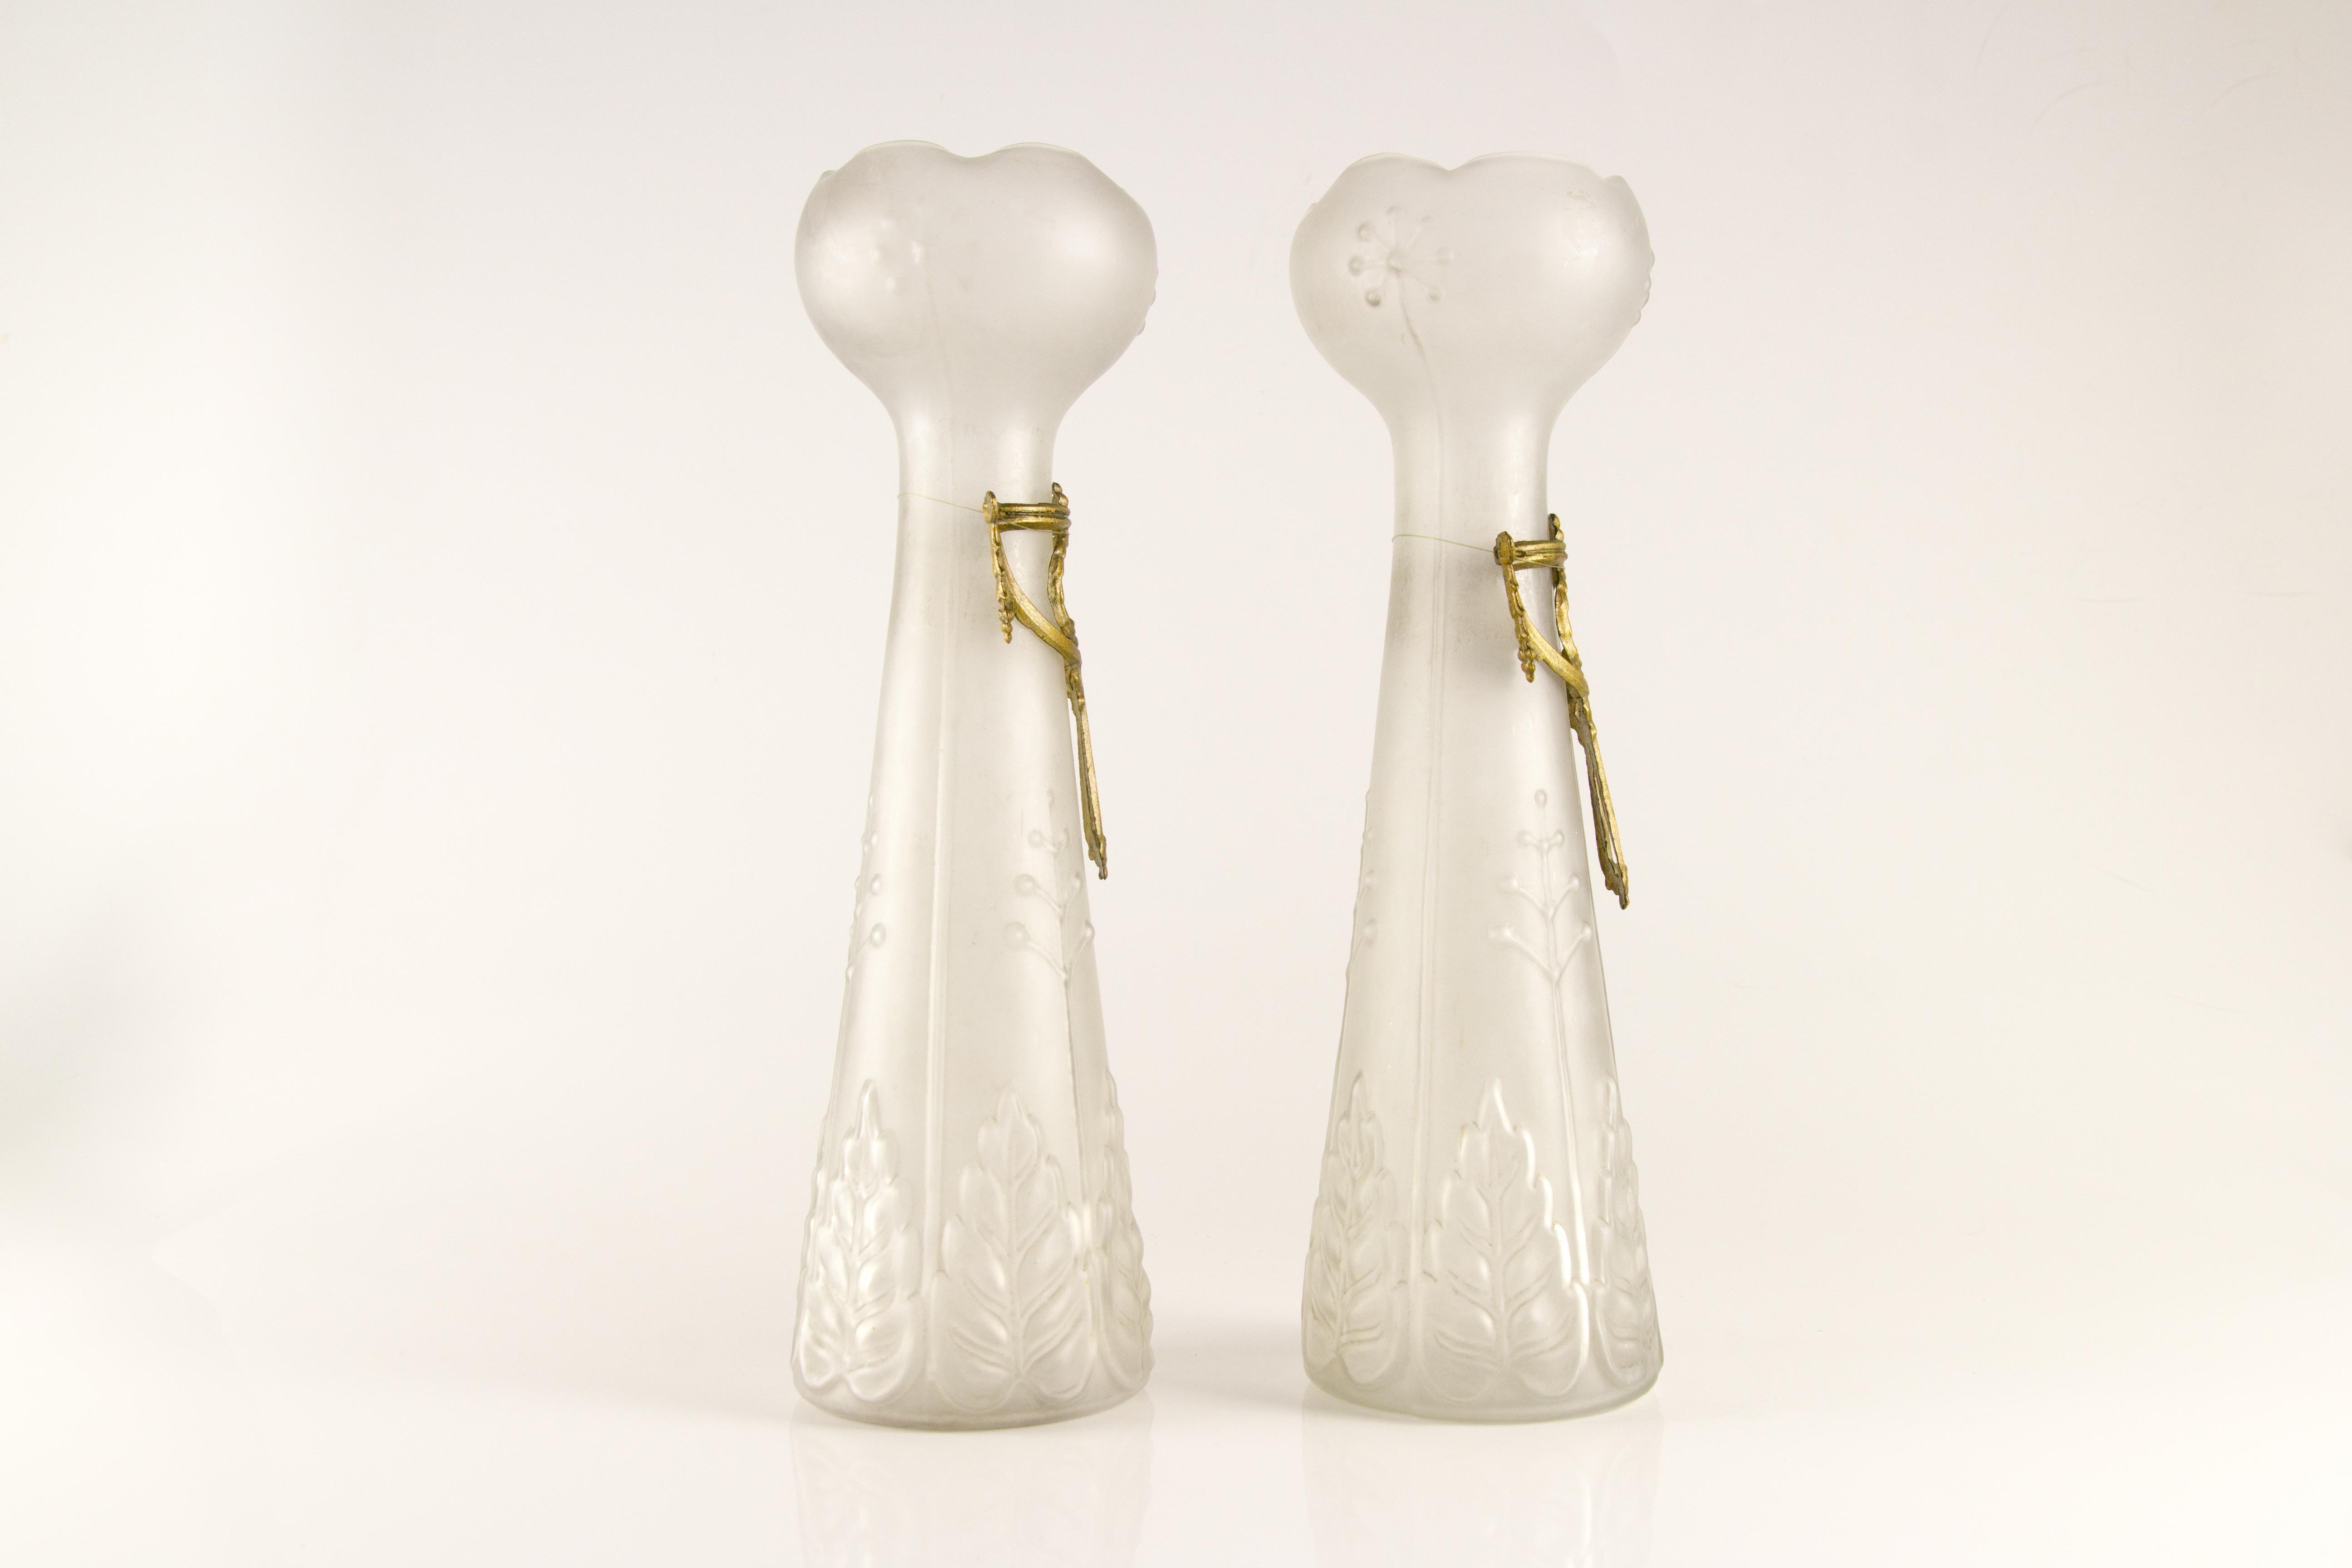 French Pair of Art Nouveau Frosted Glass Vases